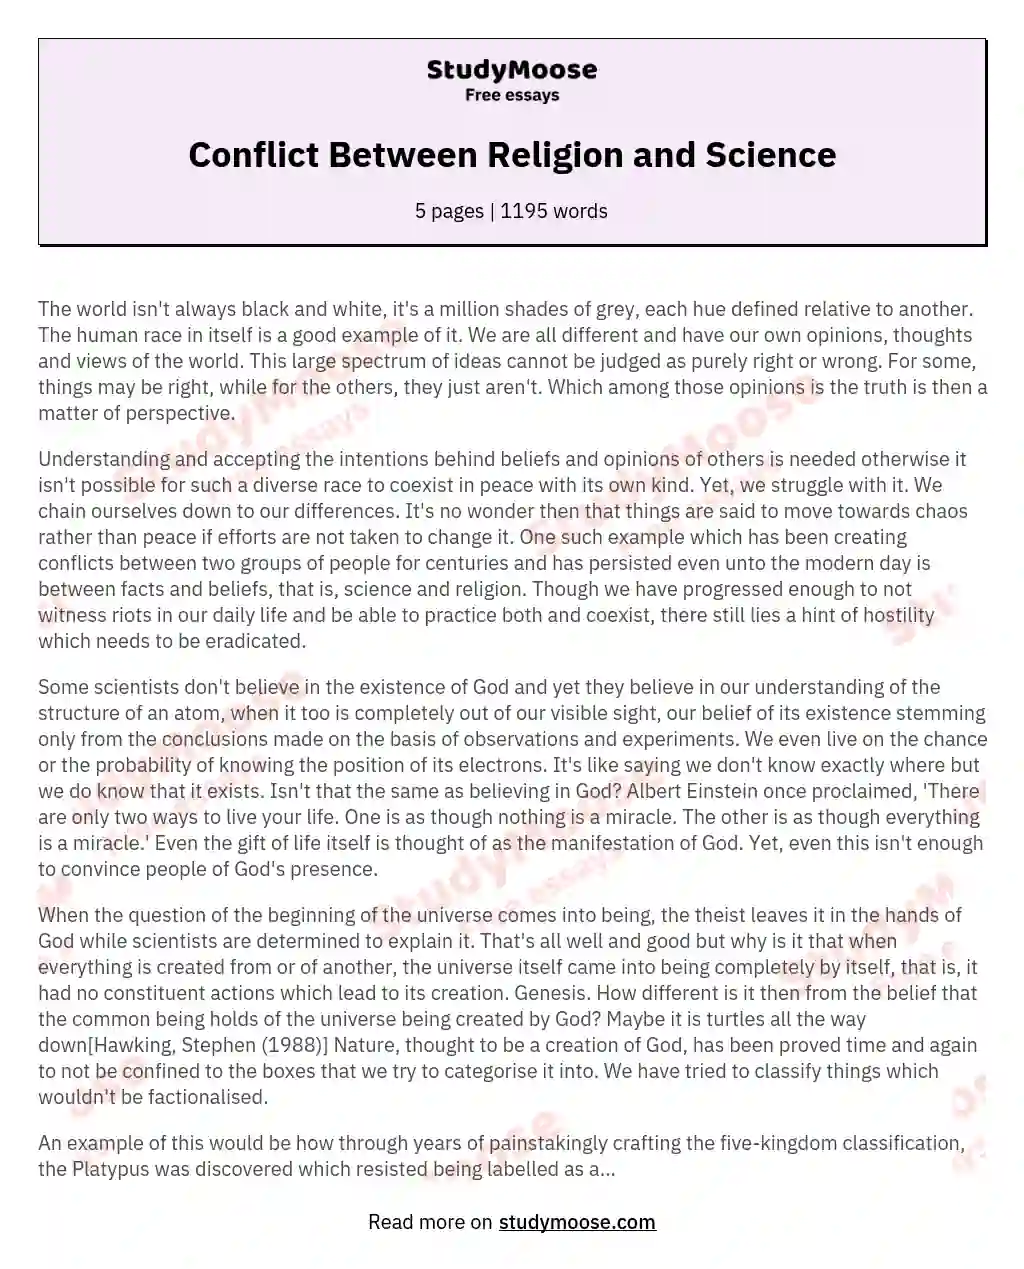 Conflict Between Religion and Science essay